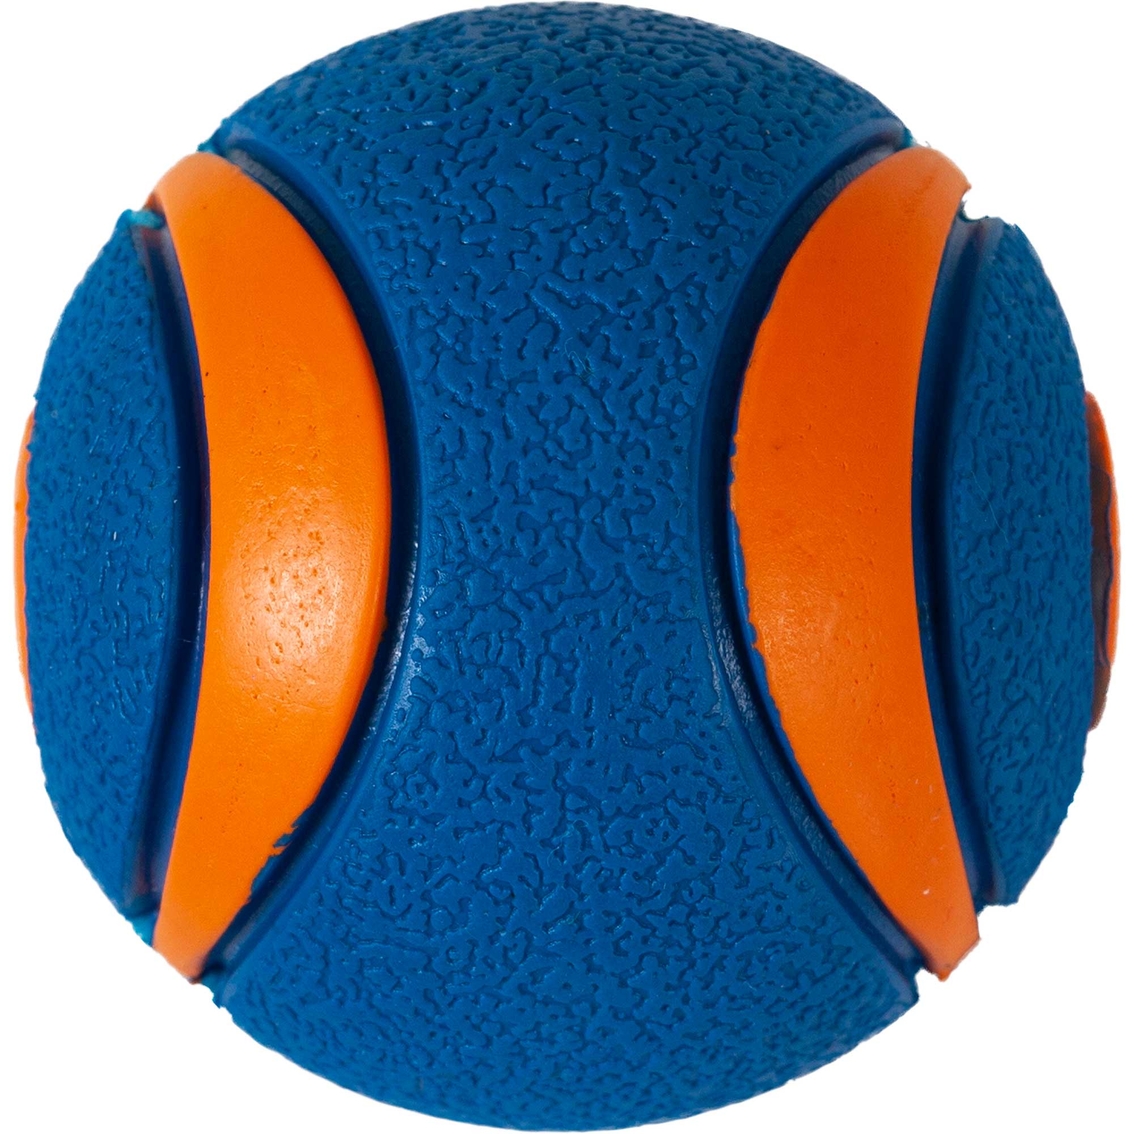 Petmate Chuckit! Ultra Squeaker Ball Large Dog Toy - Image 2 of 5